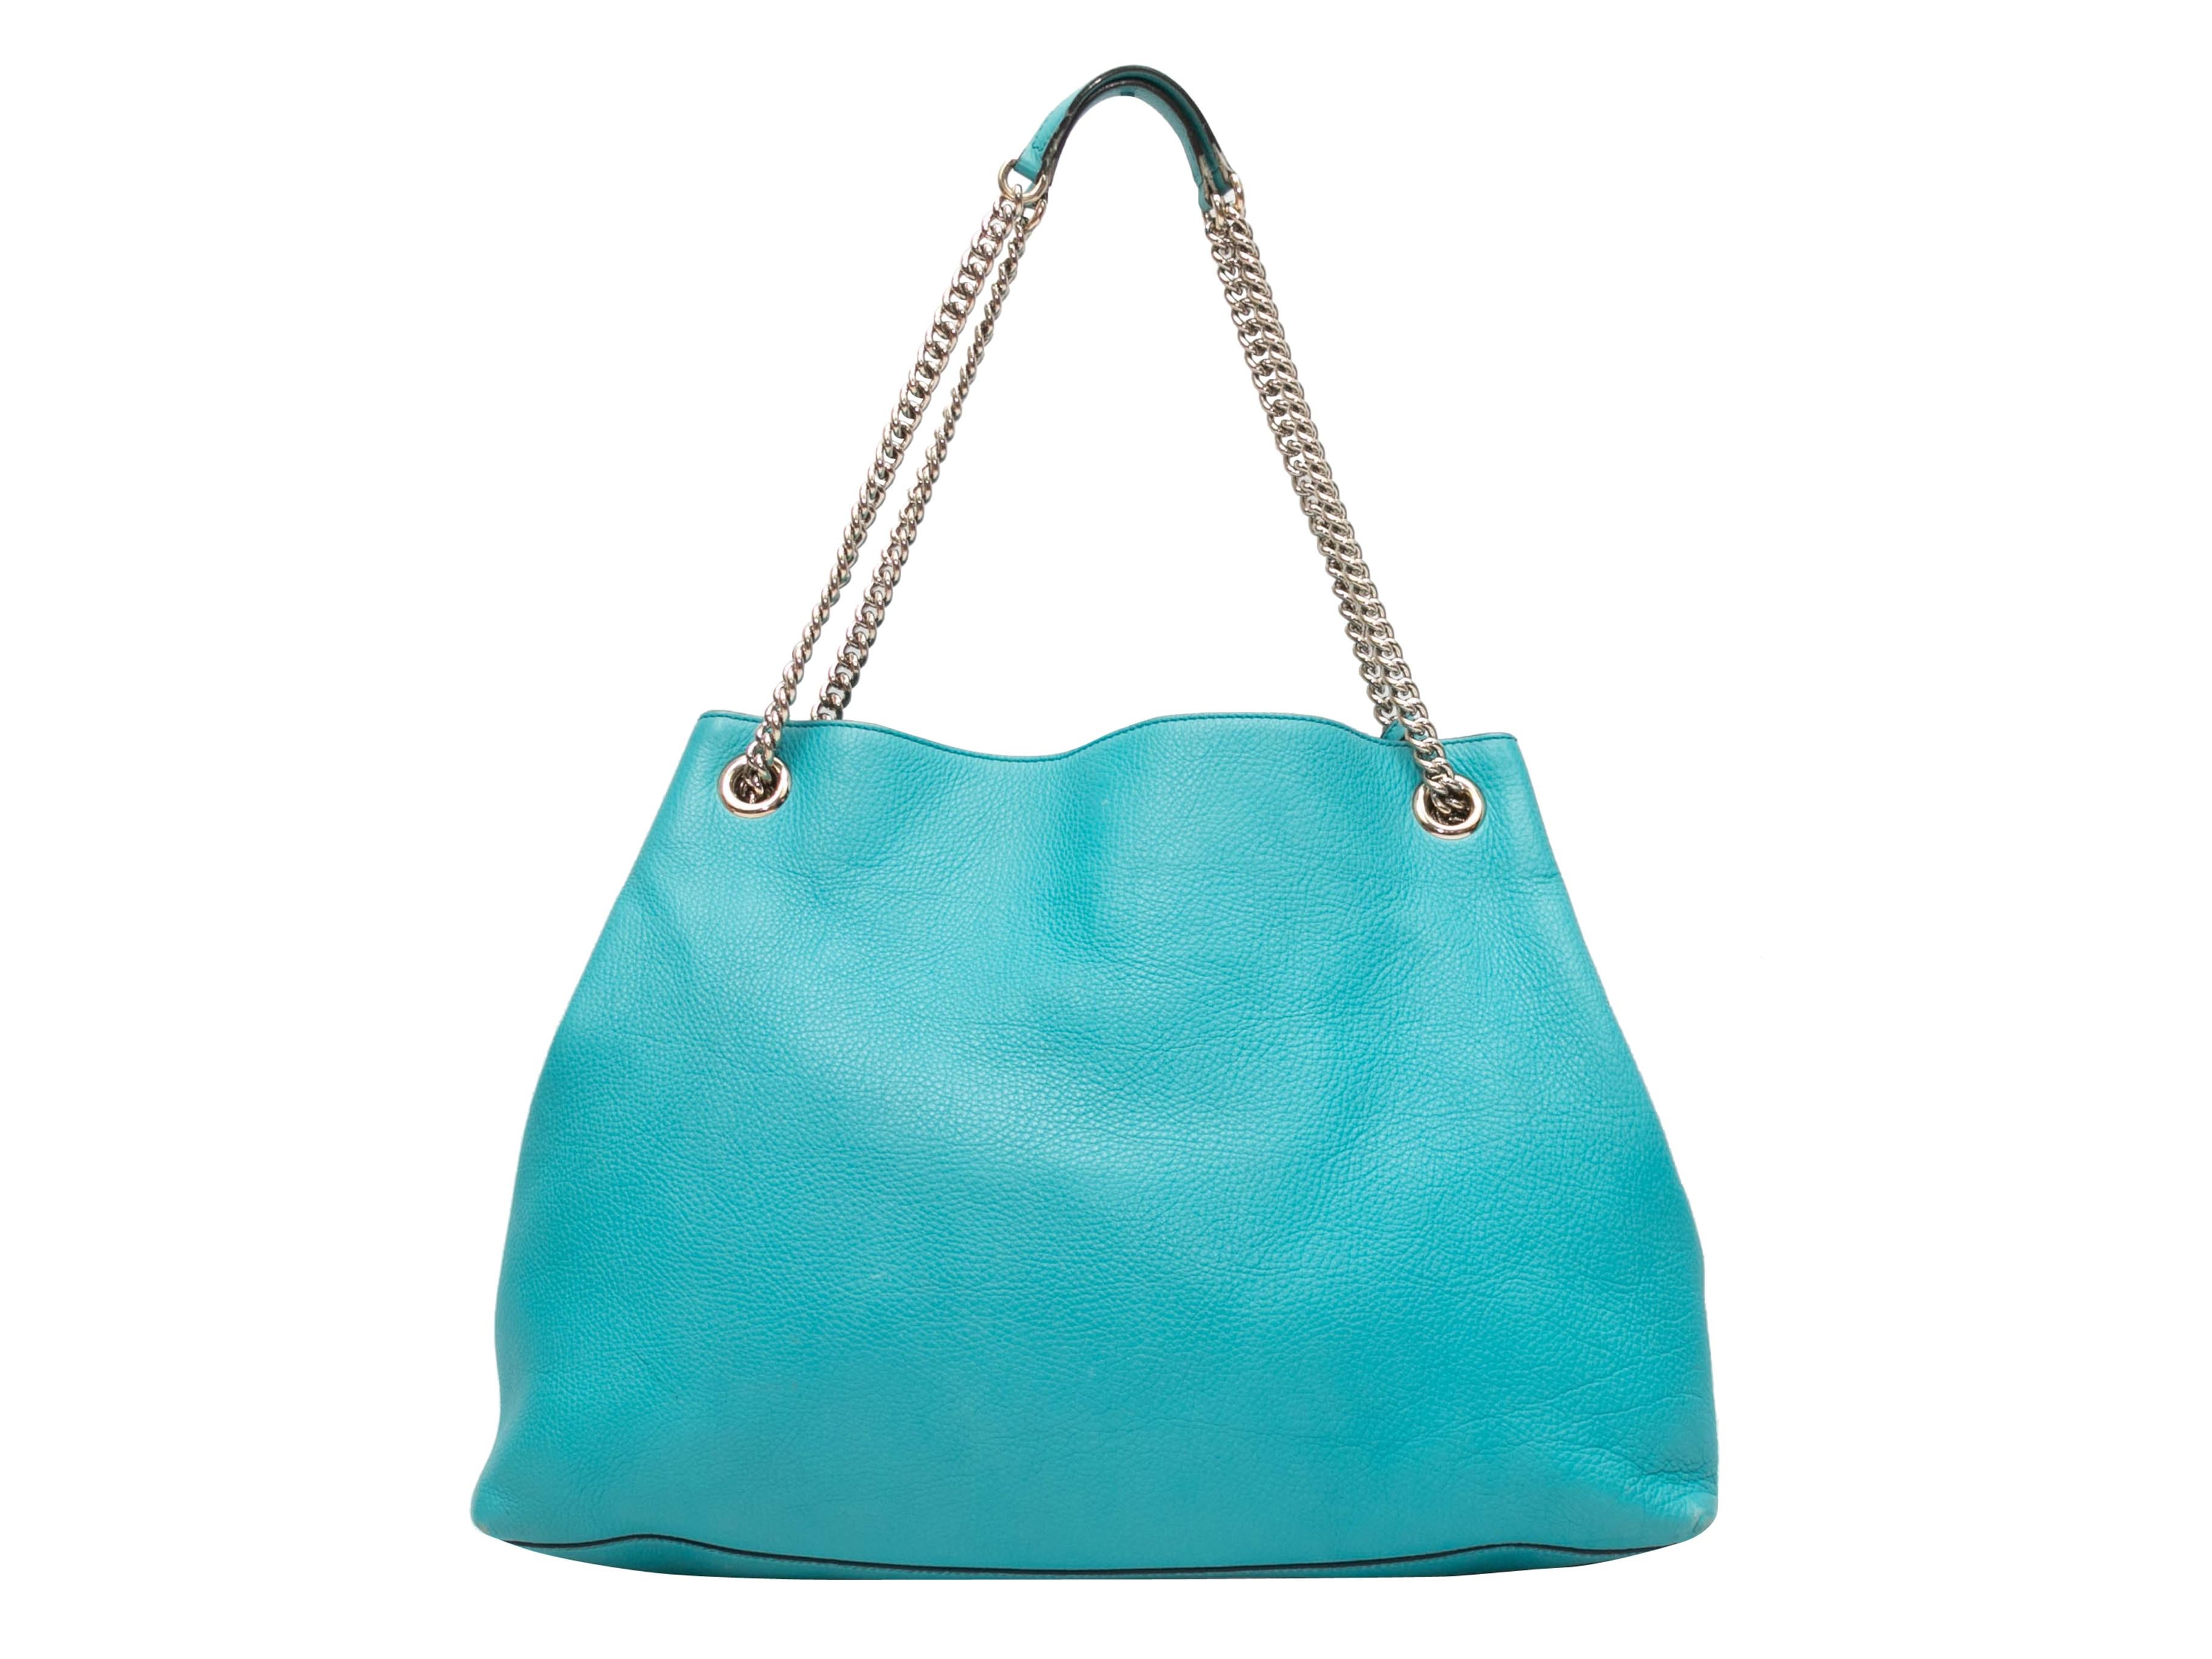 Turquoise Gucci Leather Soho Hobo Tote 2